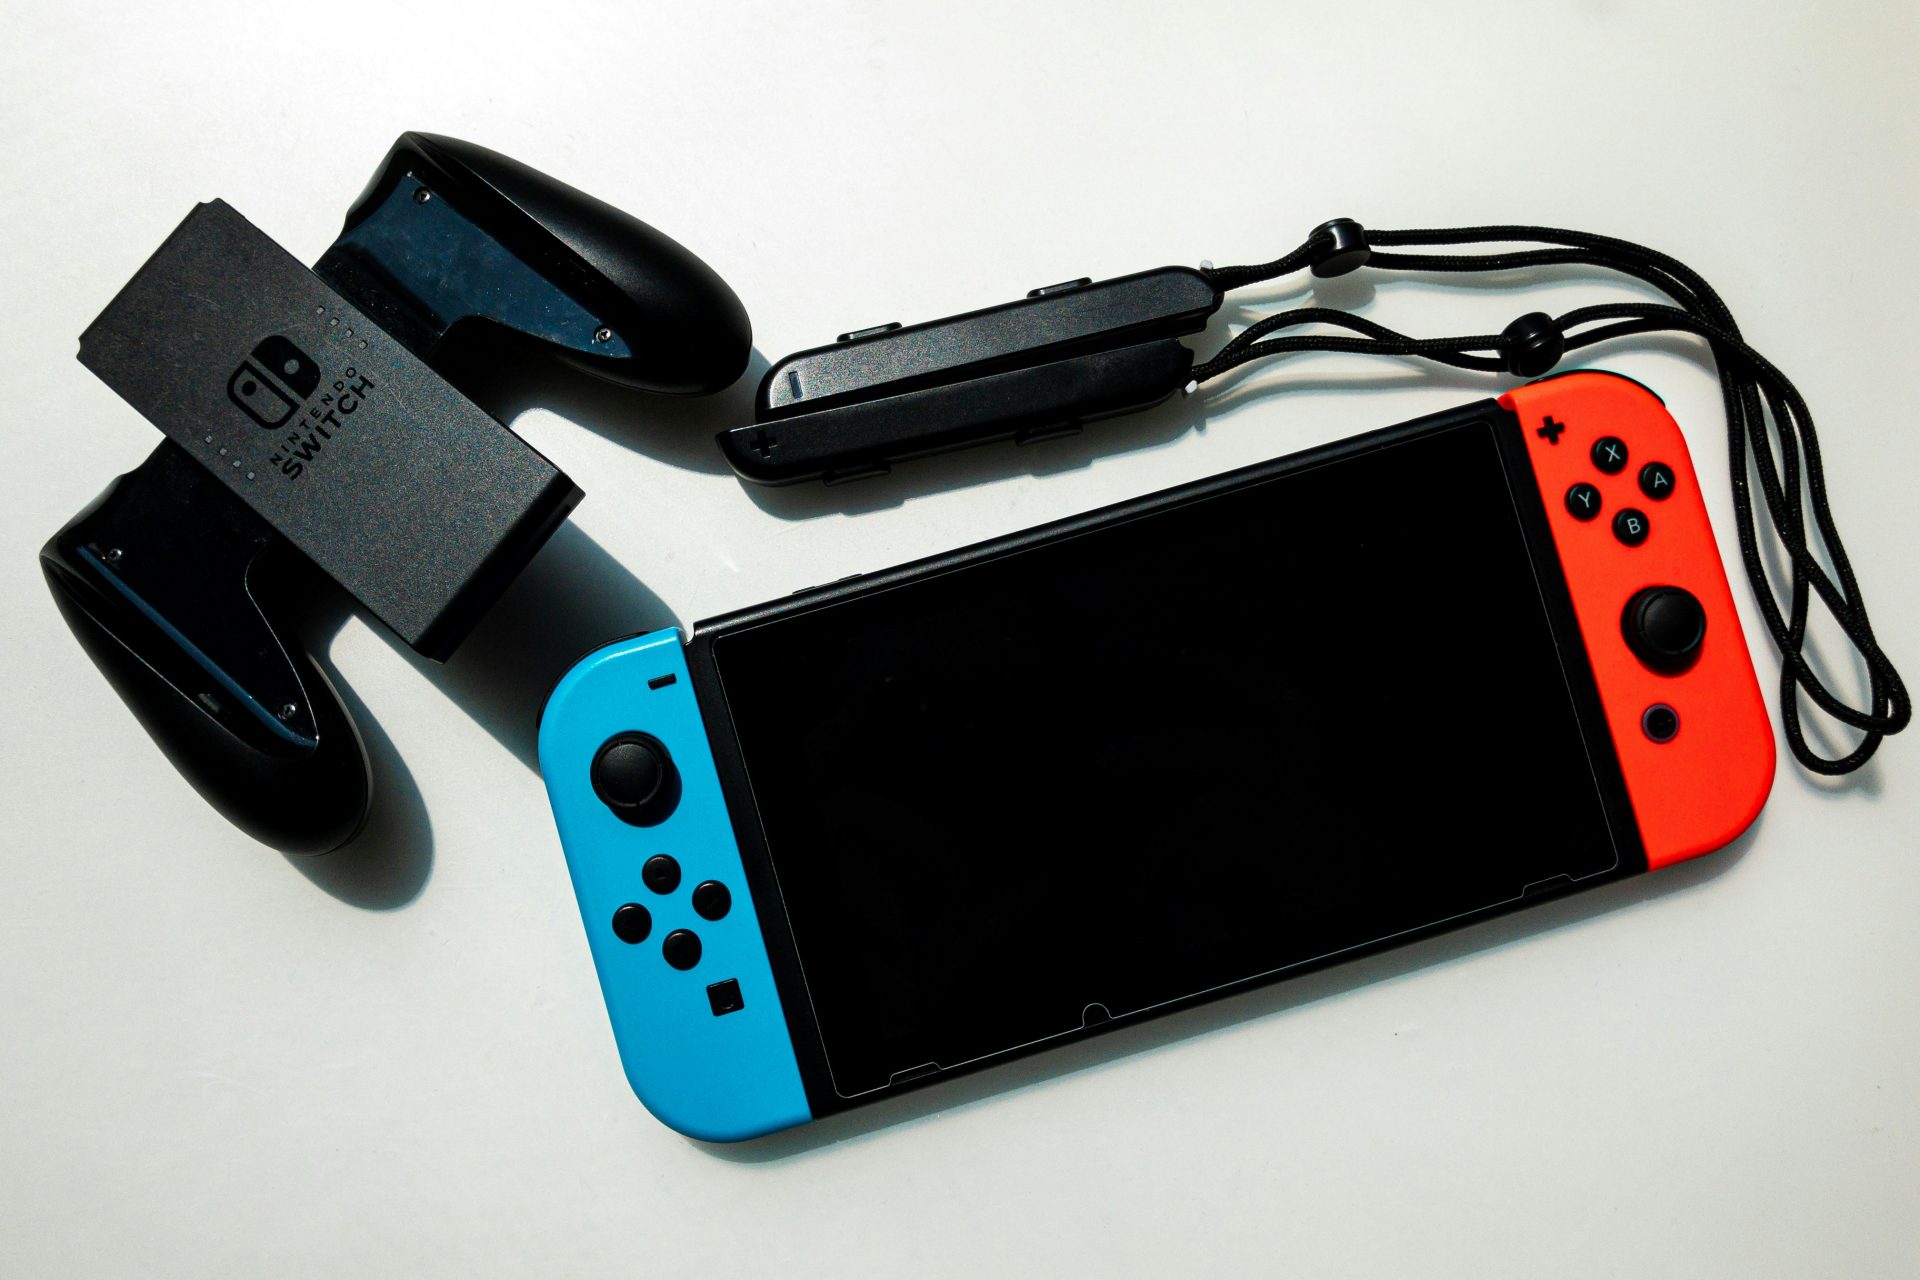 Best-selling game console in Japan 